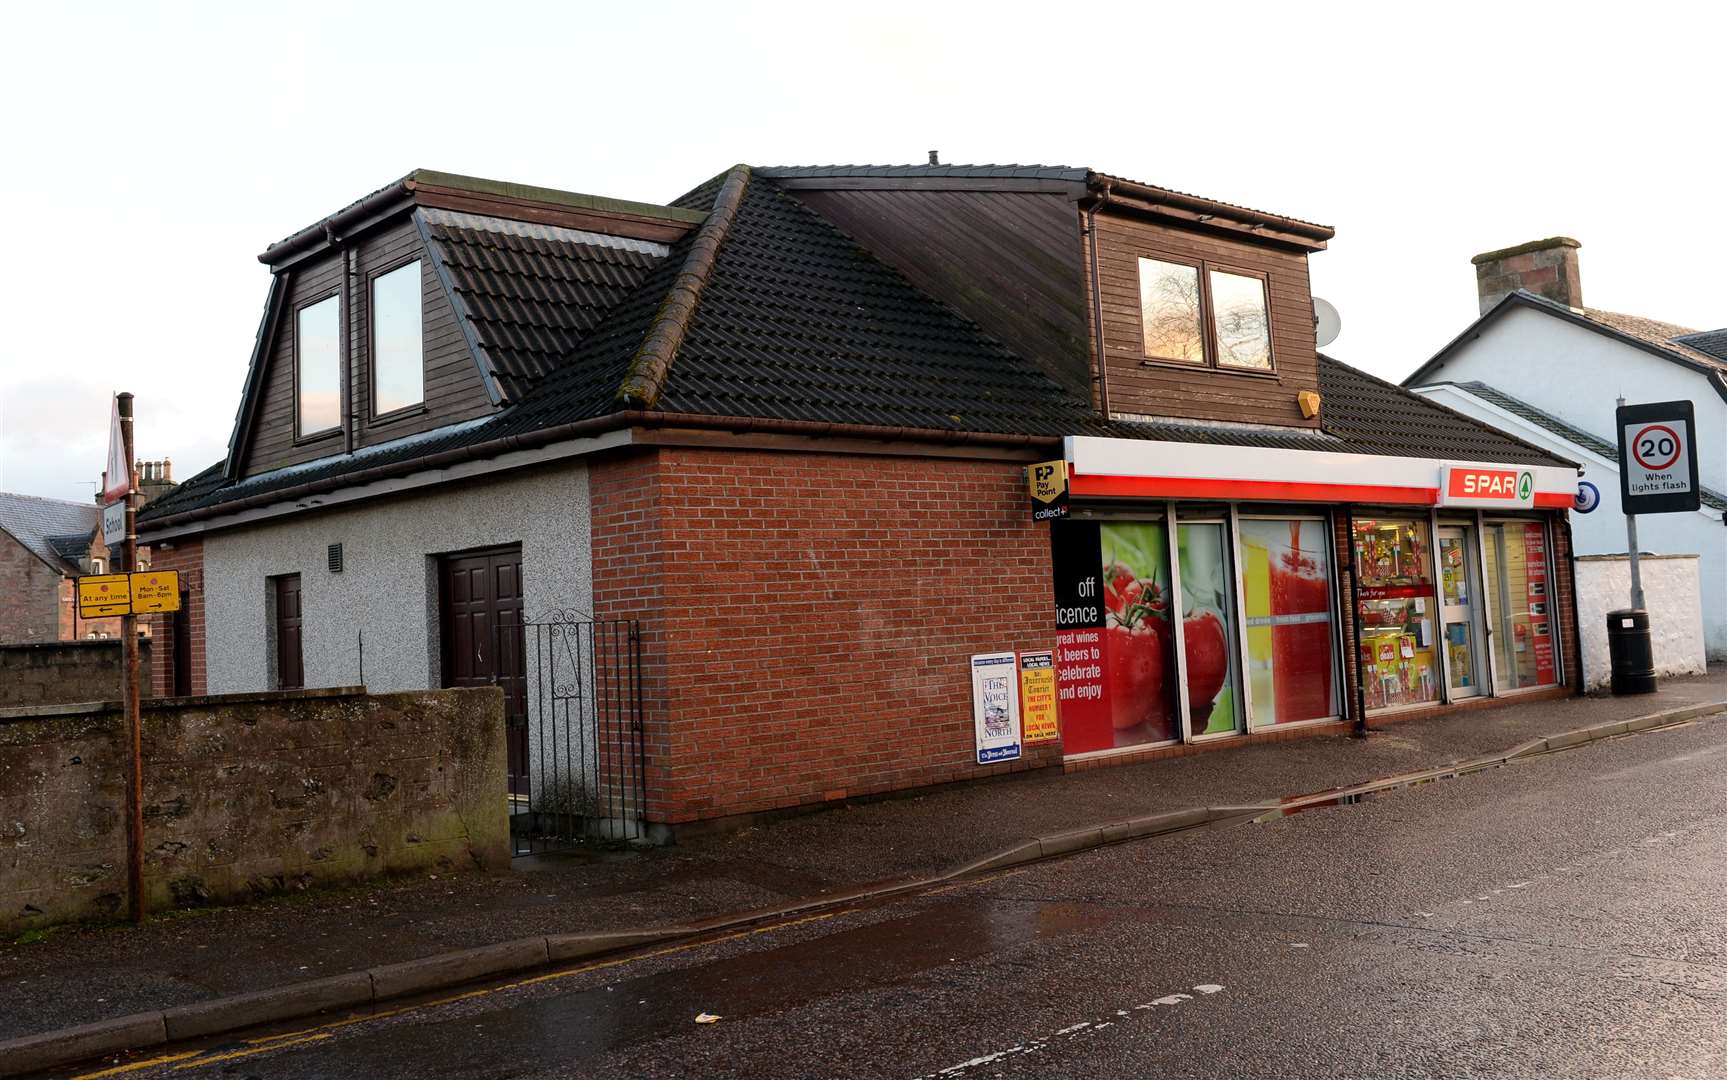 The Post Office branch was located within the Spar shop.